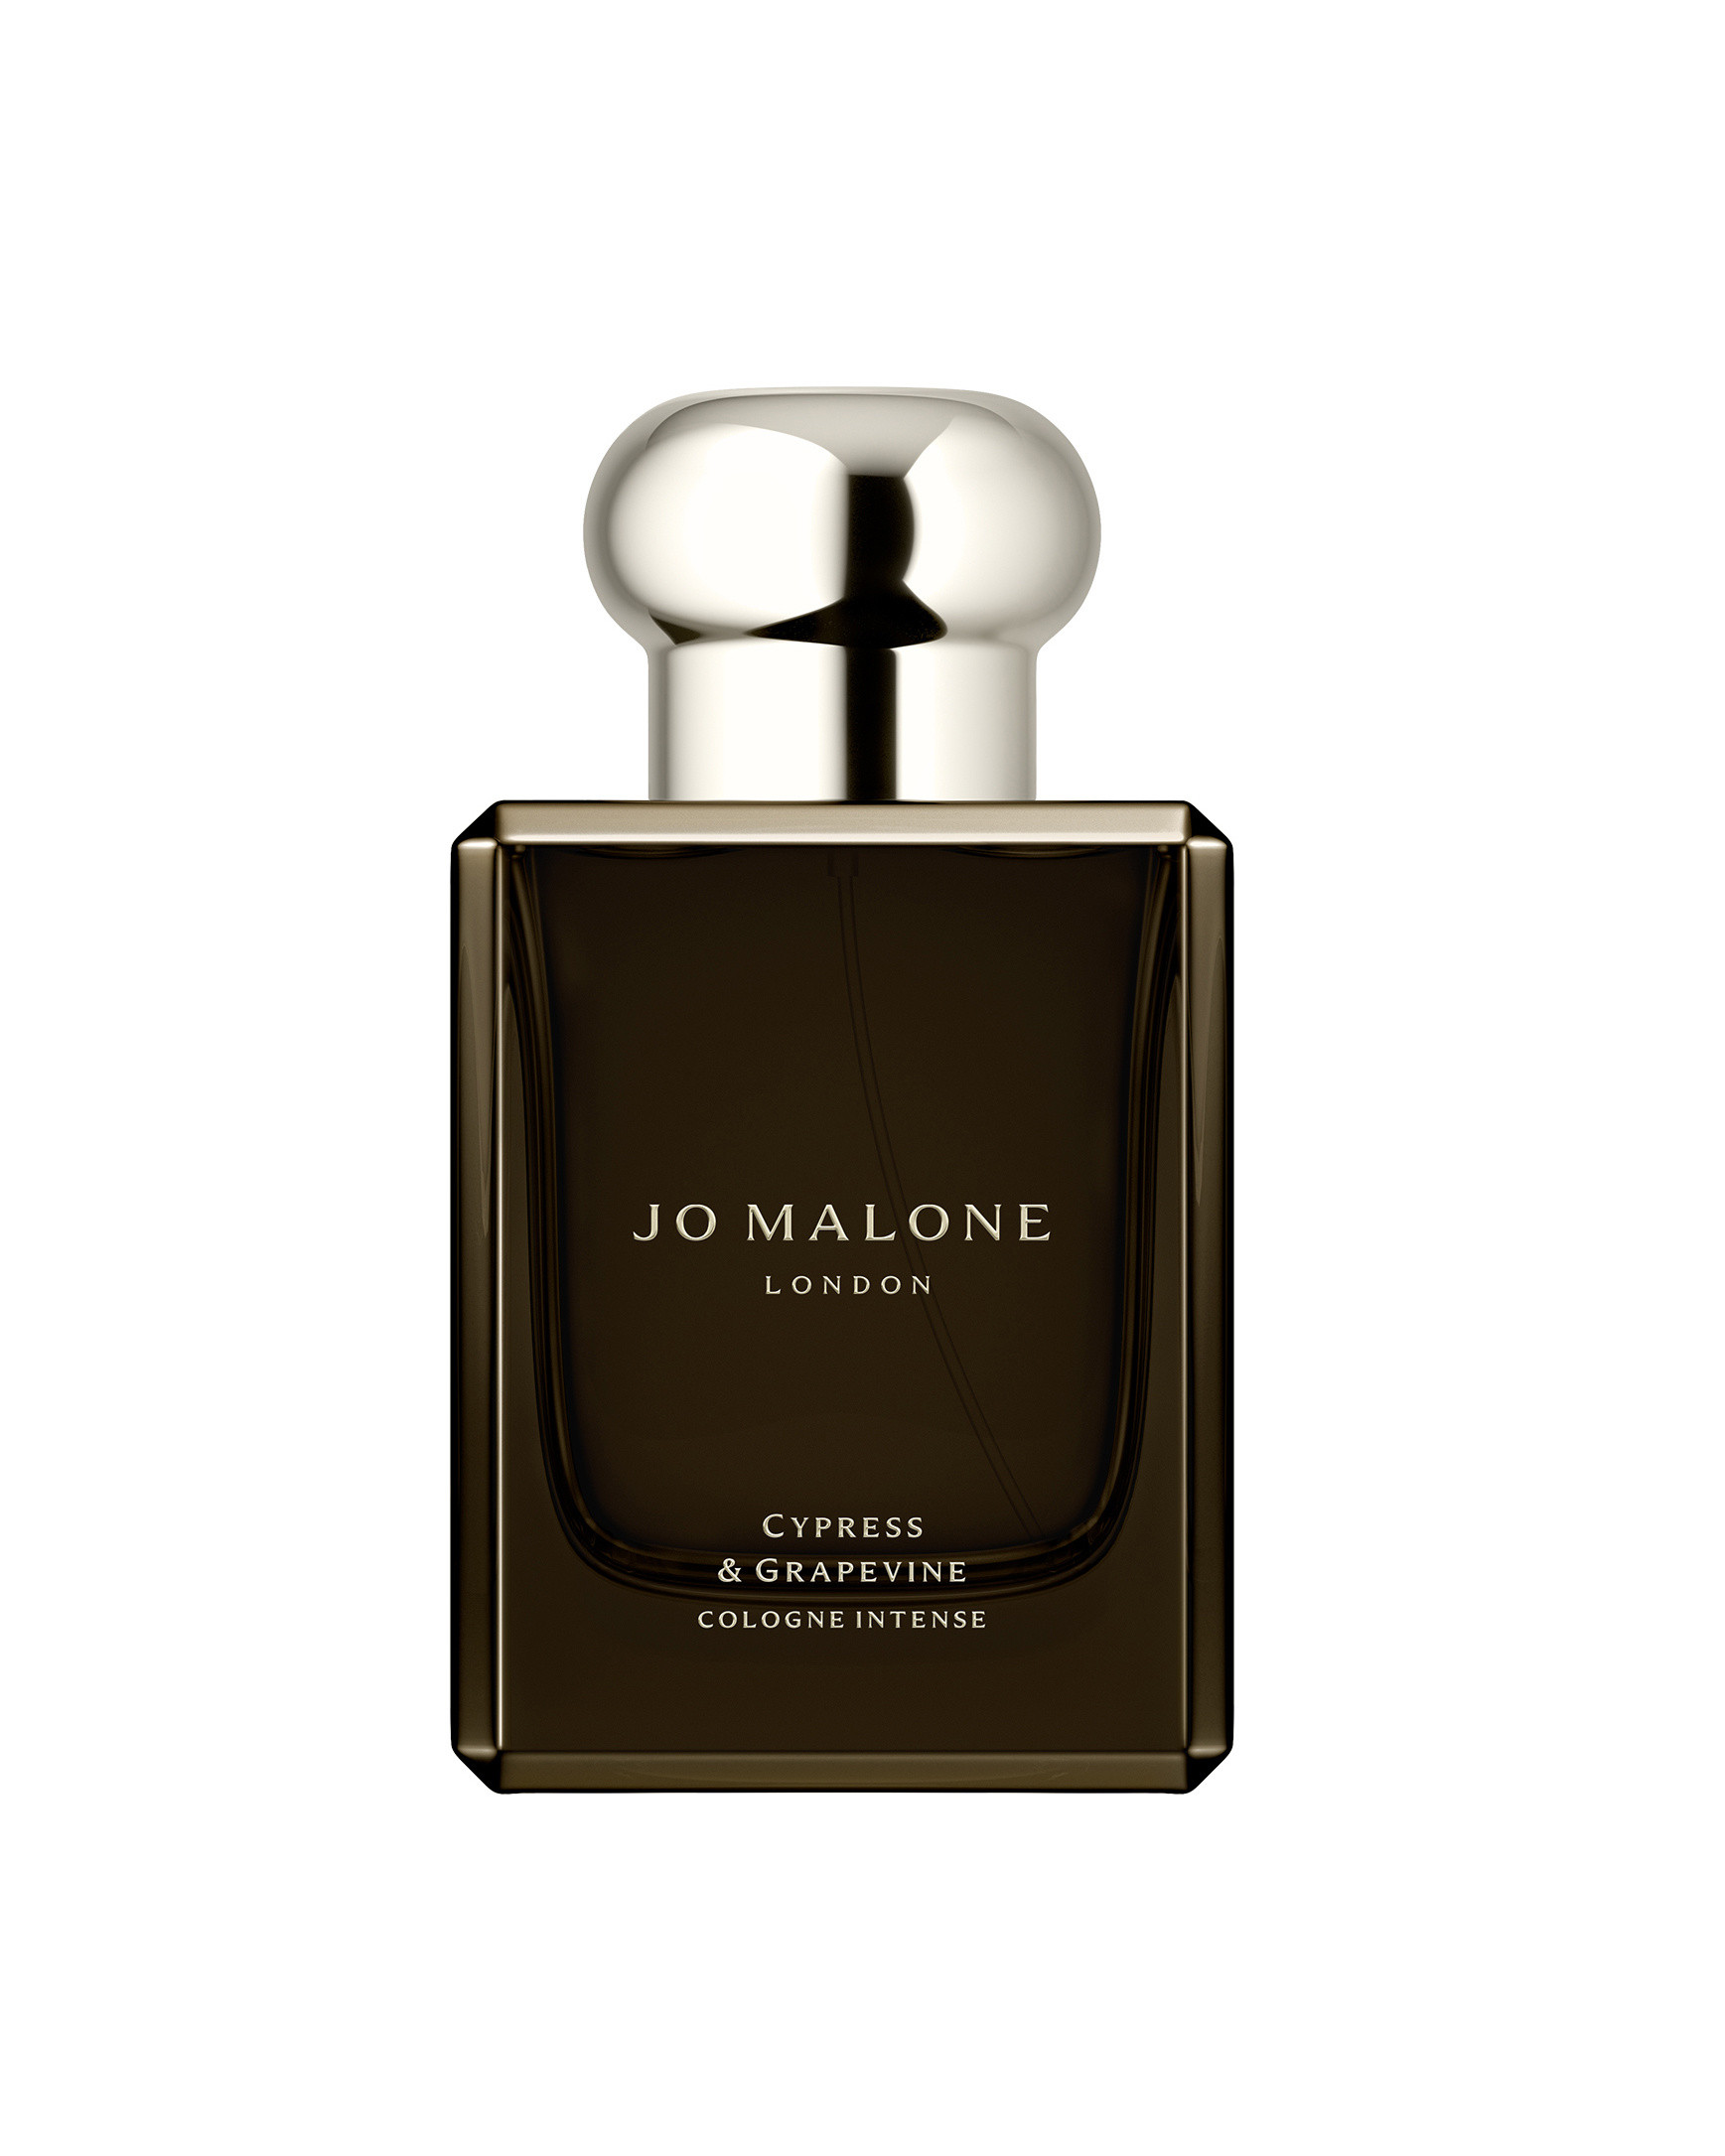 Jo Malone Cypress & Grapevine Cologne Intense 50 ml, Brown, large image number 0